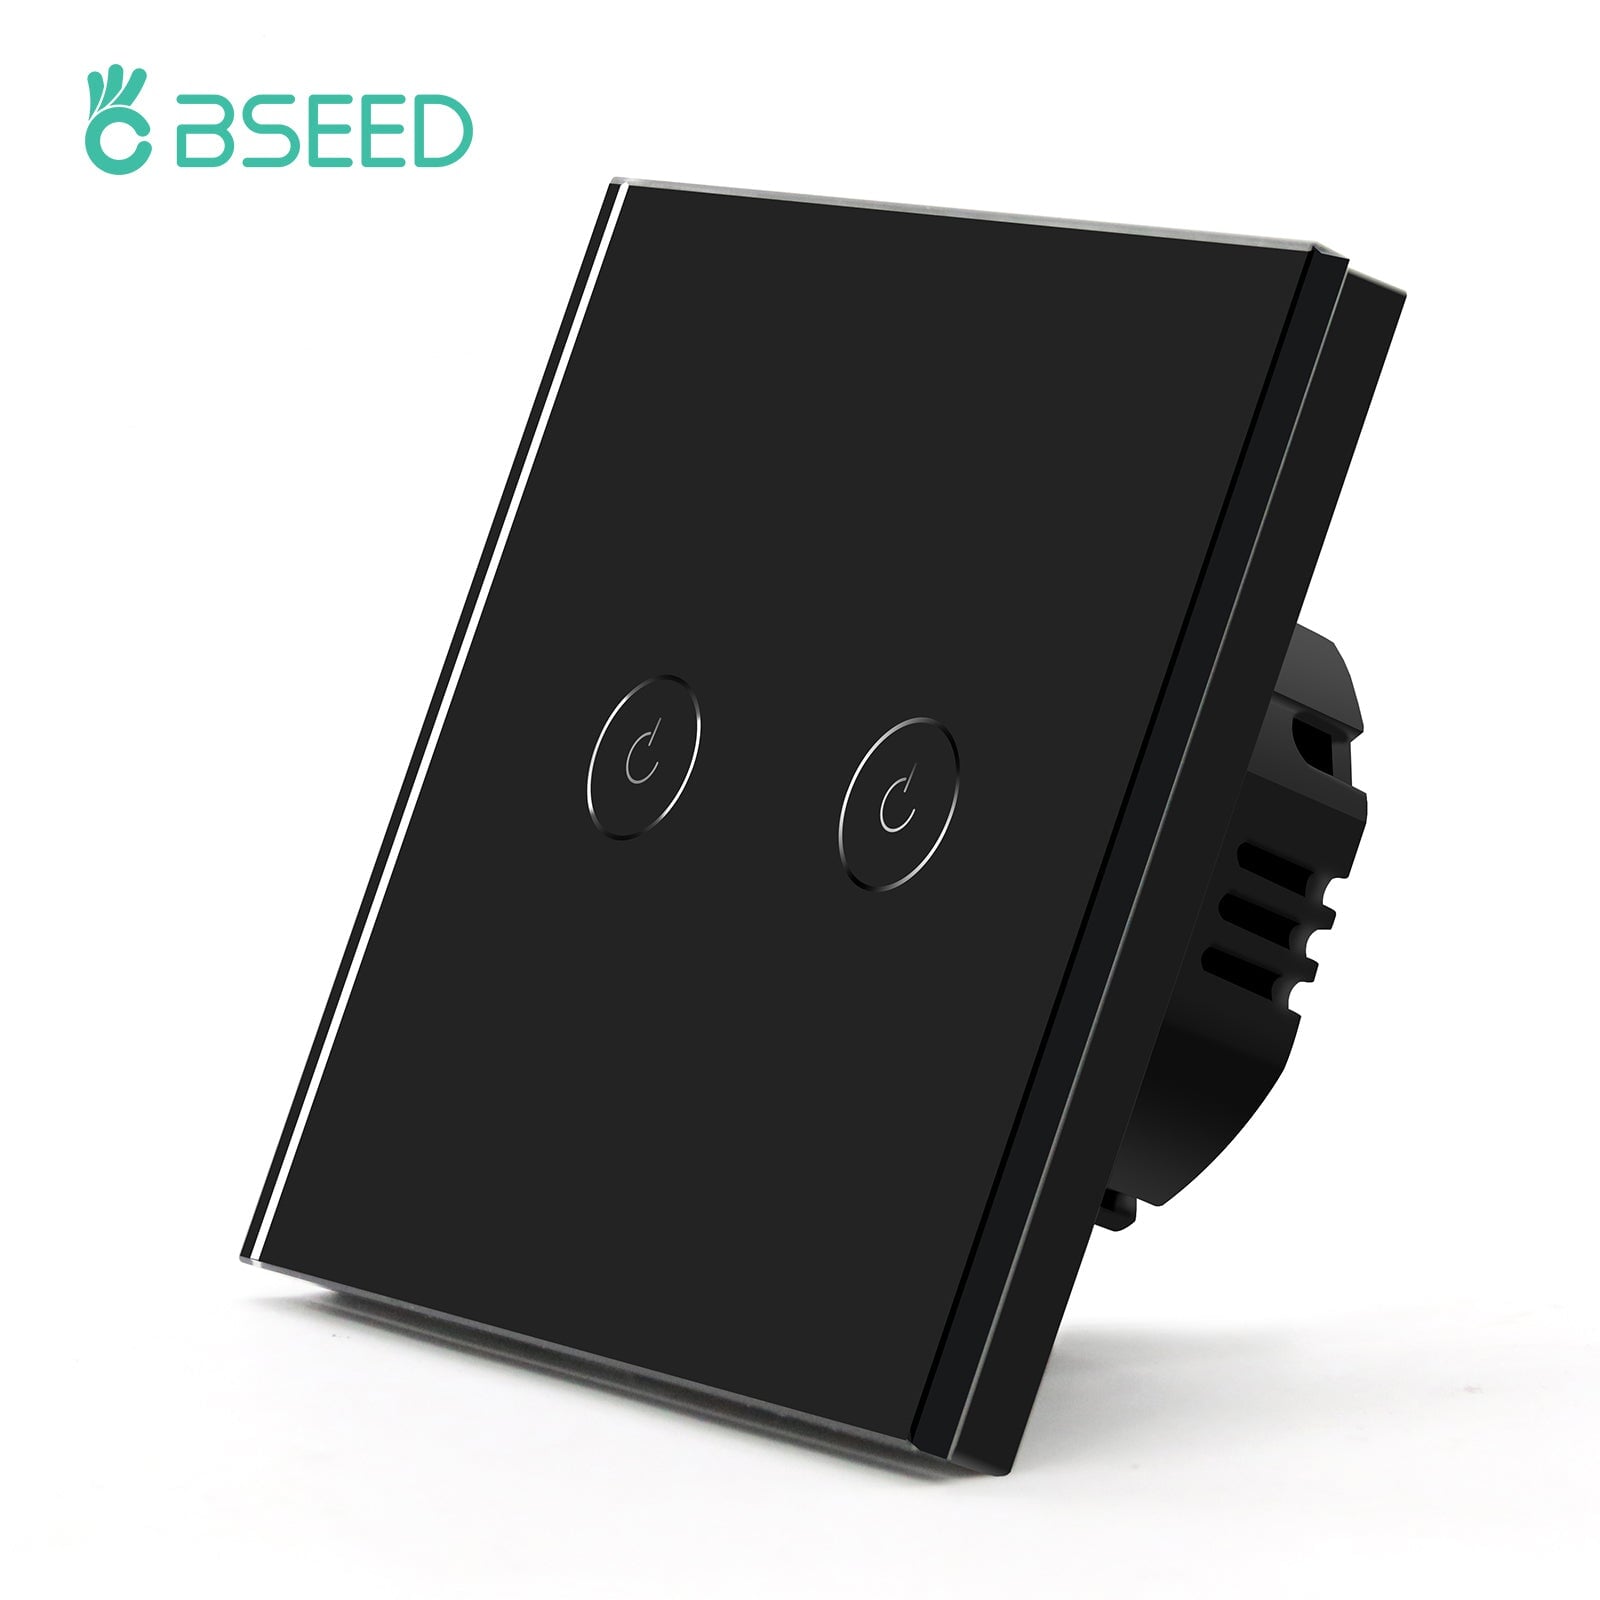 Bseed Smart Wifi Touch Switch 2 Gang 1/2/3 Way 1/2/3 Pcs/Pack Wall Plates & Covers Bseedswitch Black 1Pcs/Pack 